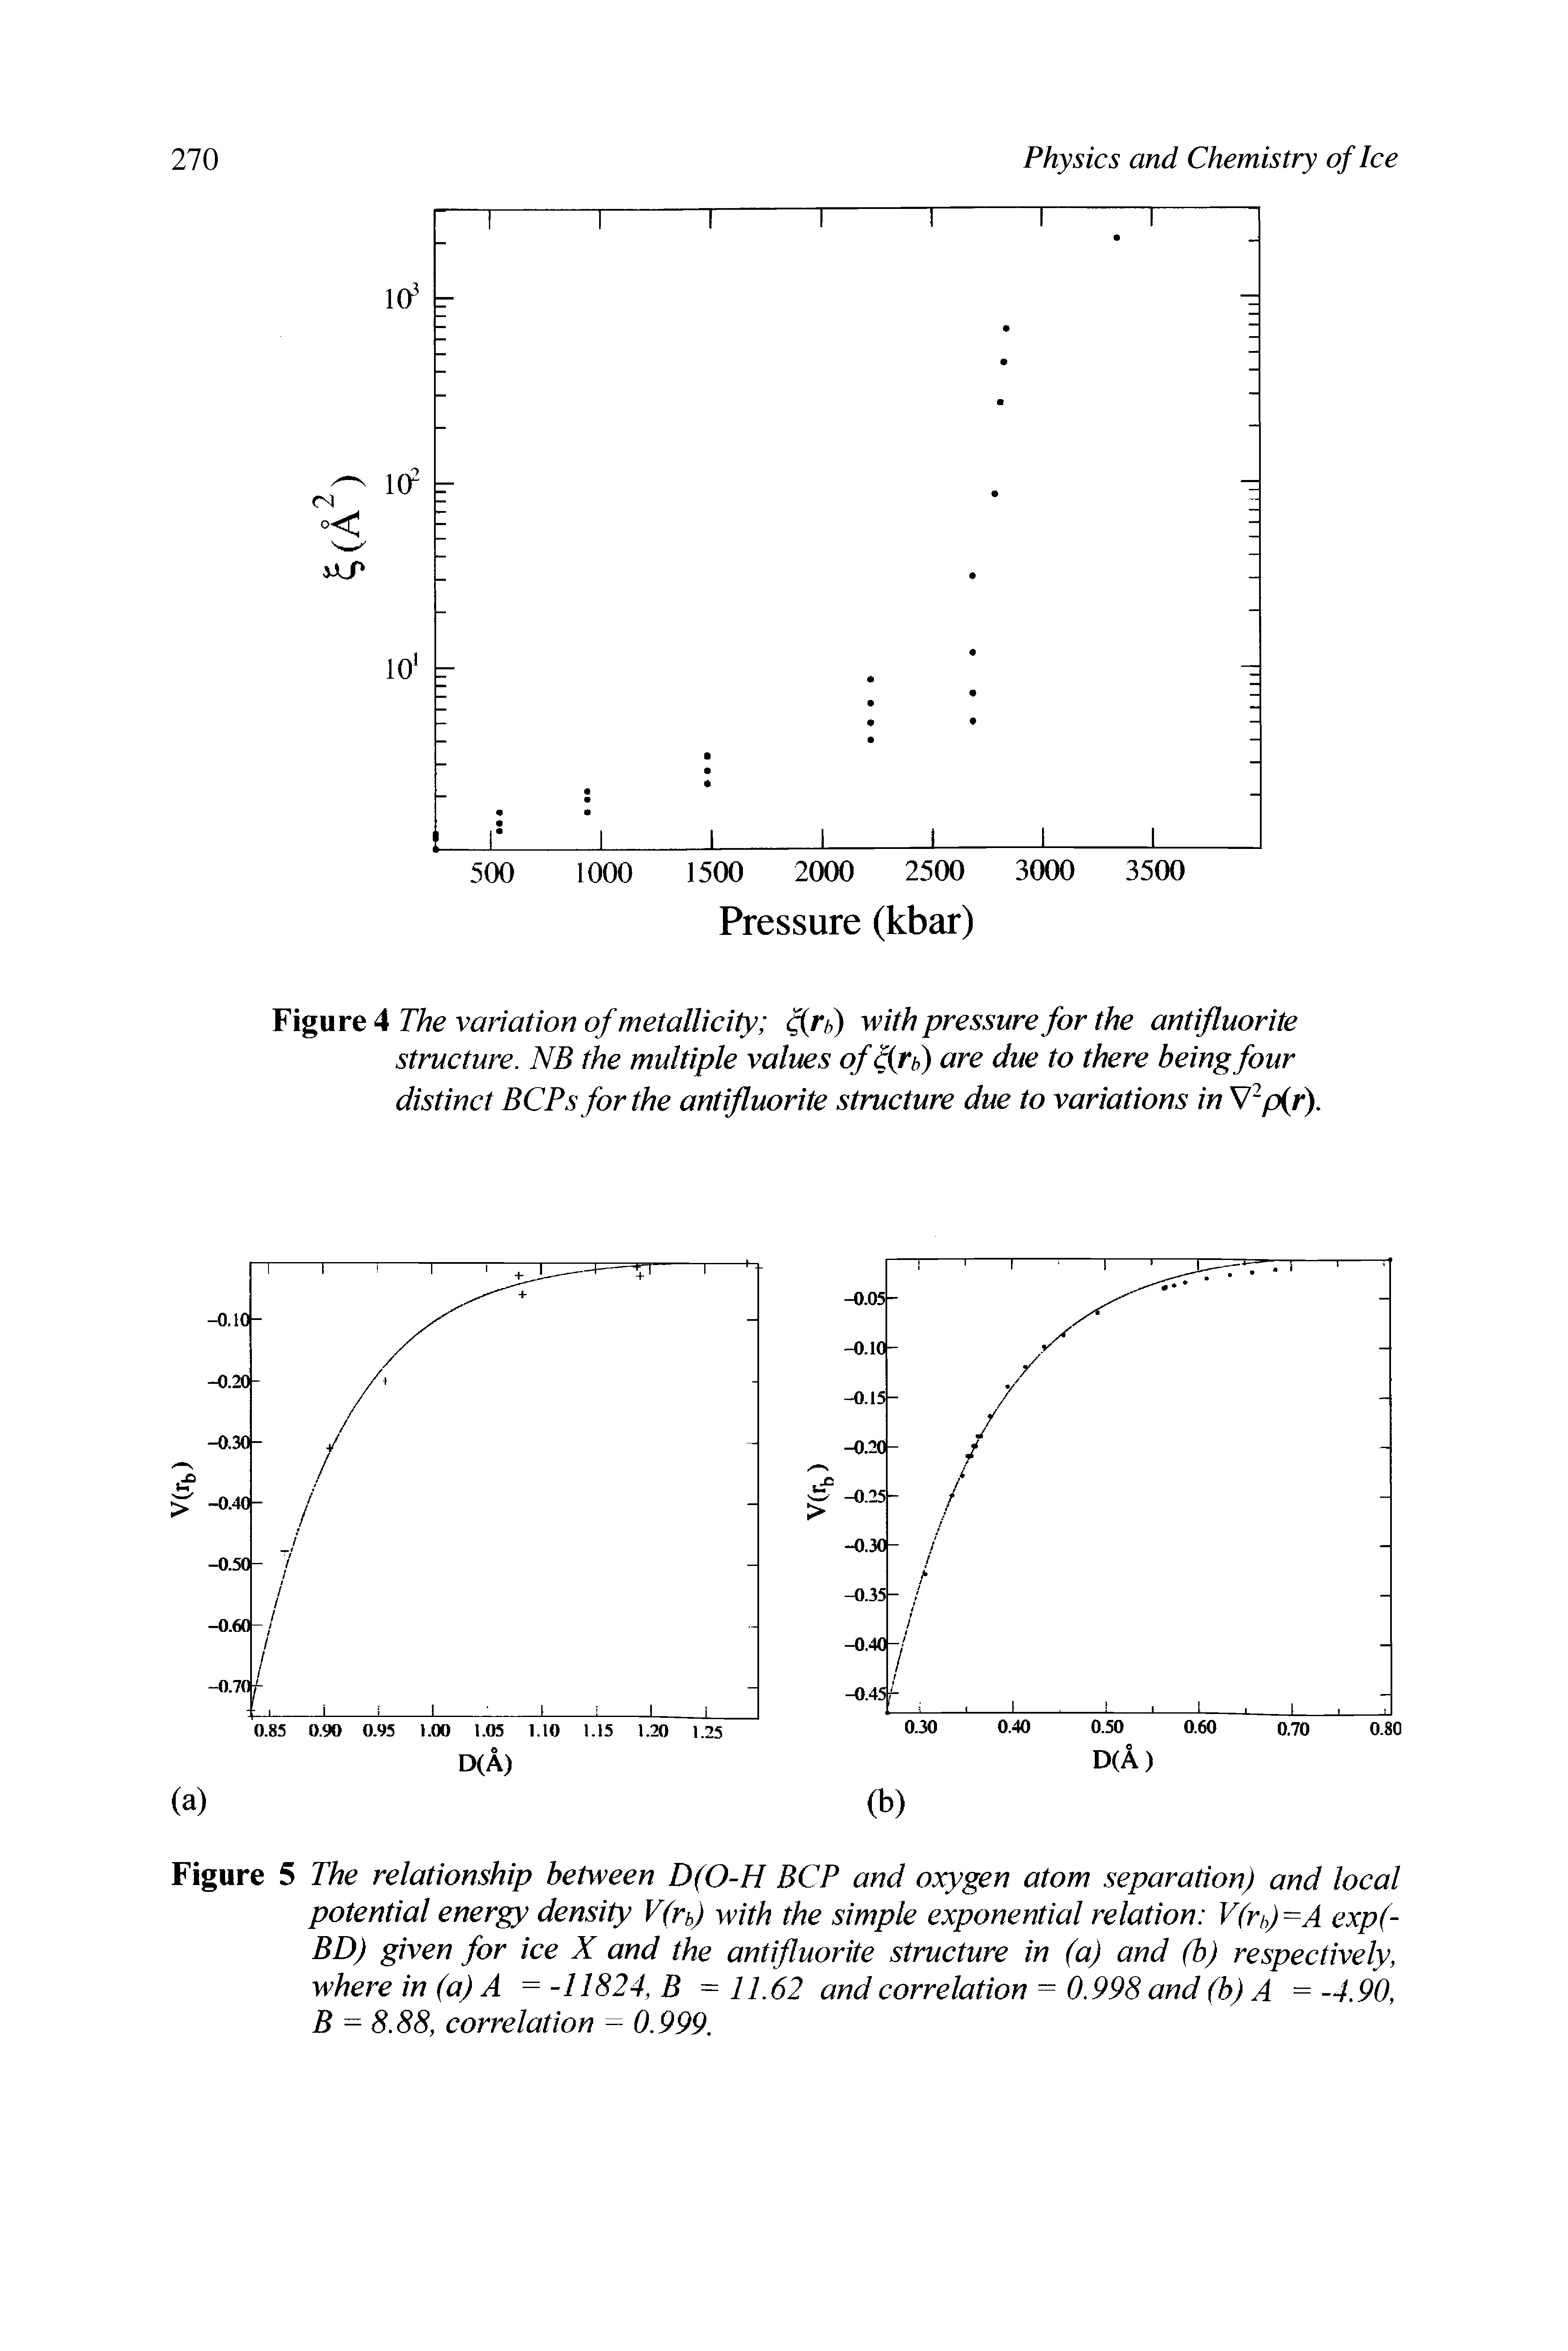 Figure 5 The relationship between D(0-H BCP and oxygen atom separation) and local potential energy density V(rh) with the simple exponential relation V(ri)=A exp(-BD) given for ice X and the antifluorite structure in (a) and (b) respectively, where in (a) A = -11824, B =11.62 and correlation 0.998 and (b) A = -4.90, B = 8.88, correlation 0.999.